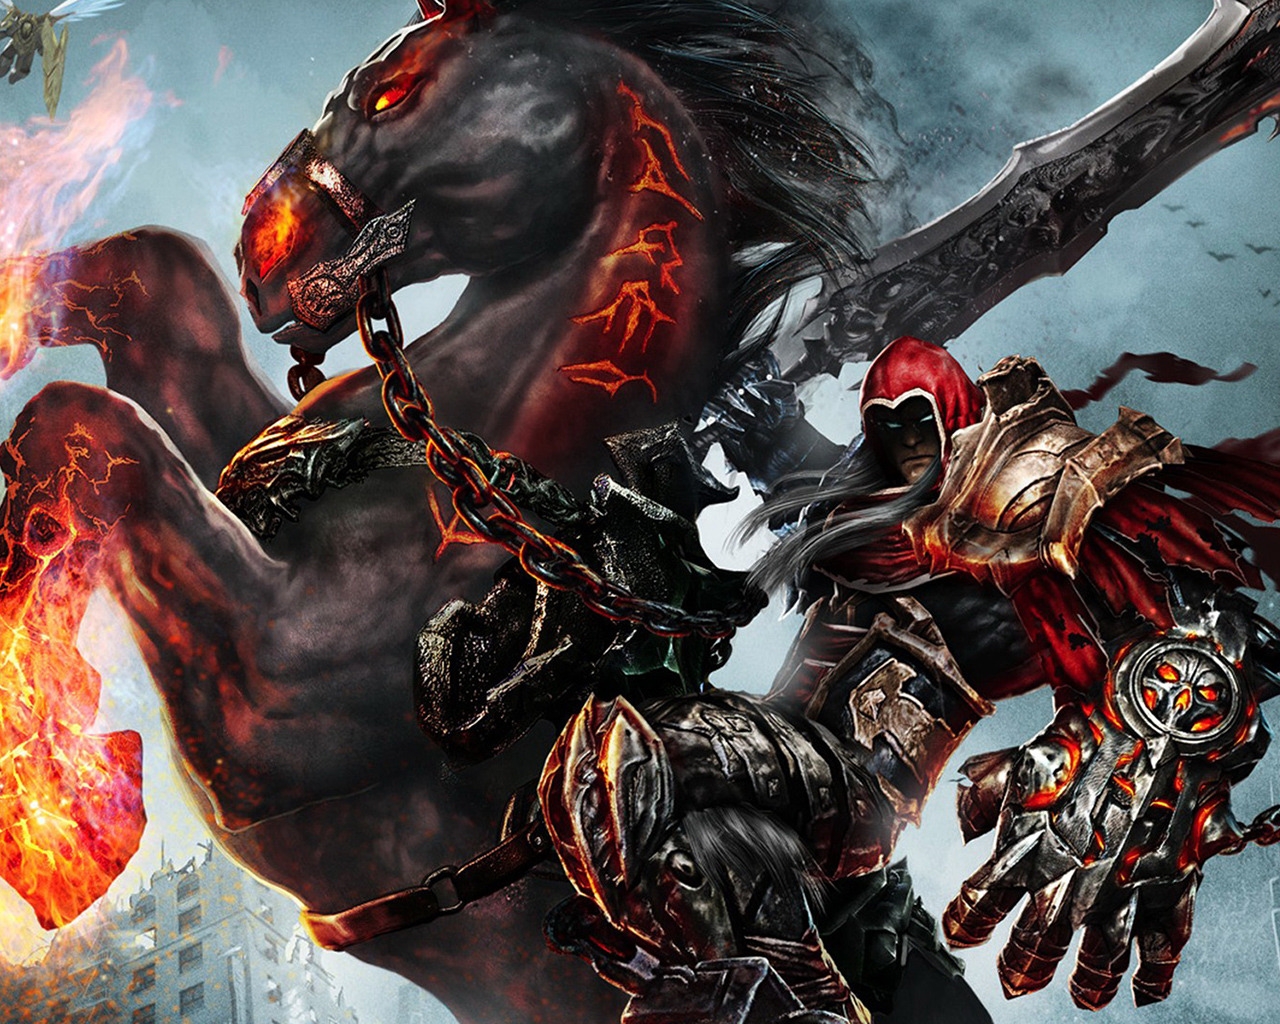 Darksiders Wrath of War Video Game for 1280 x 1024 resolution